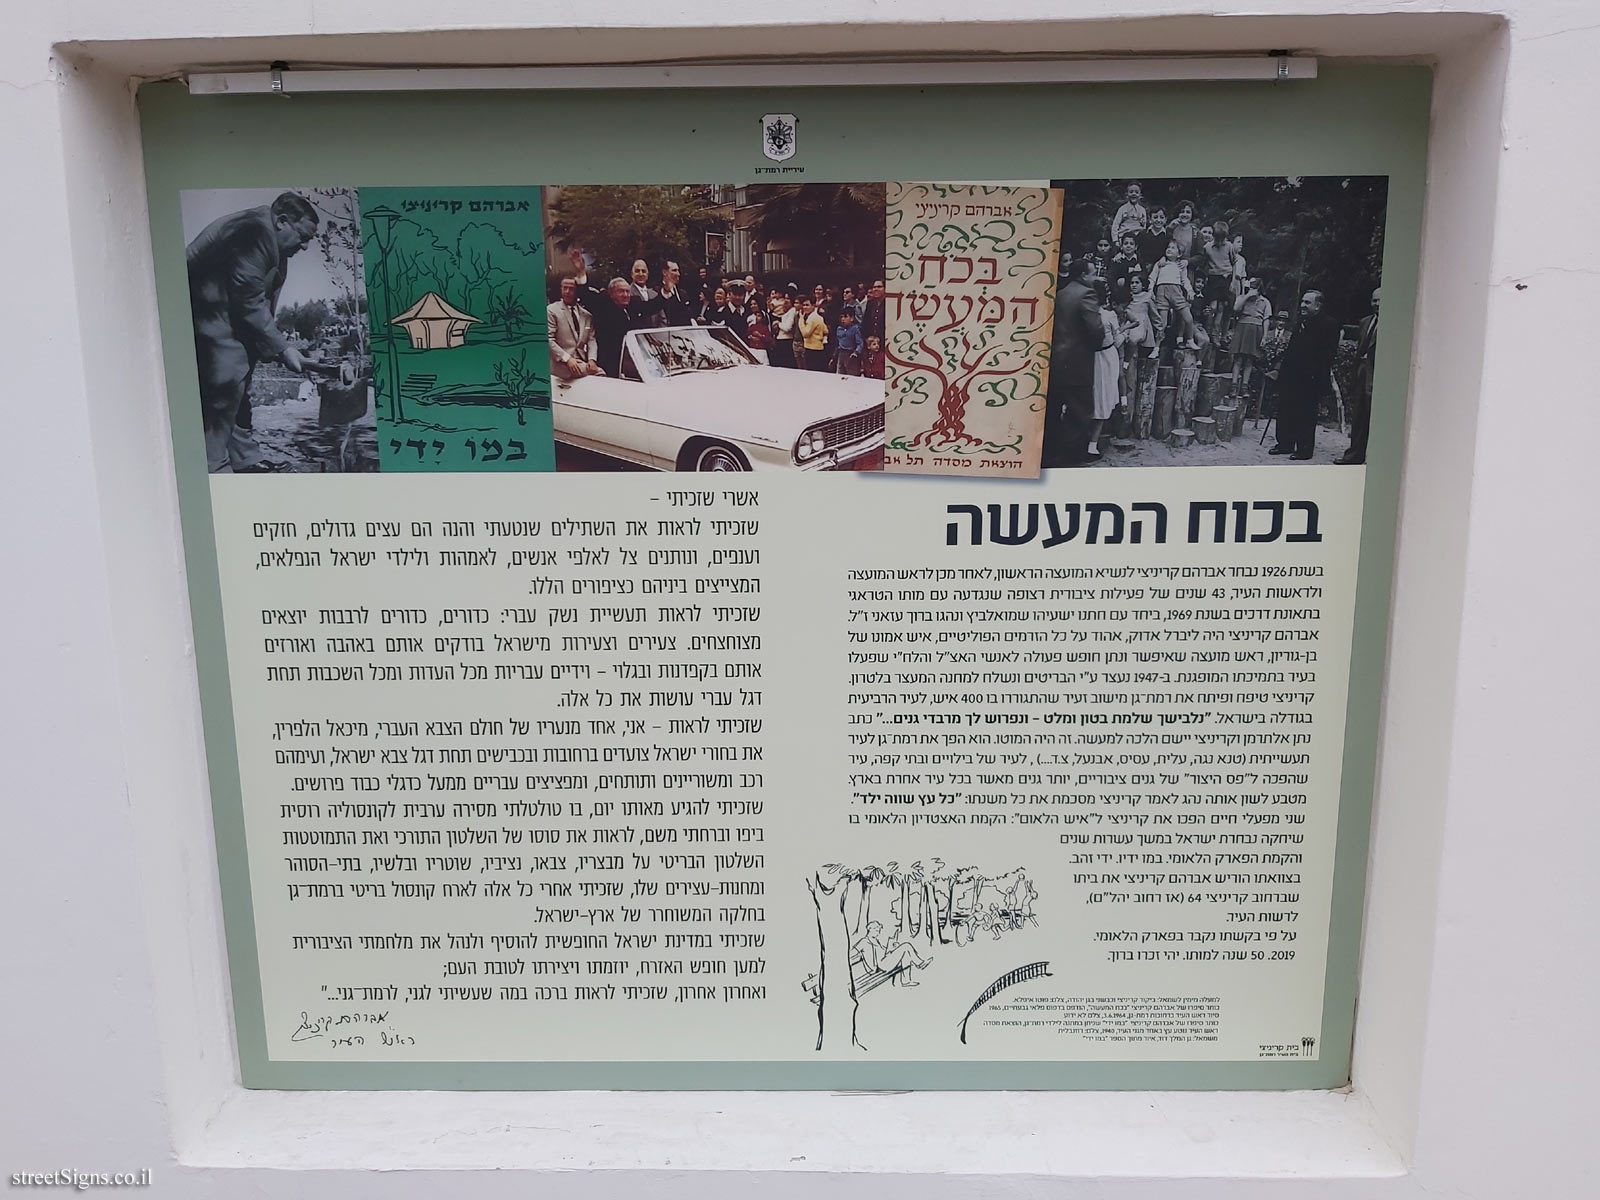 Ramat Gan - Open Exhibition - By the power of action